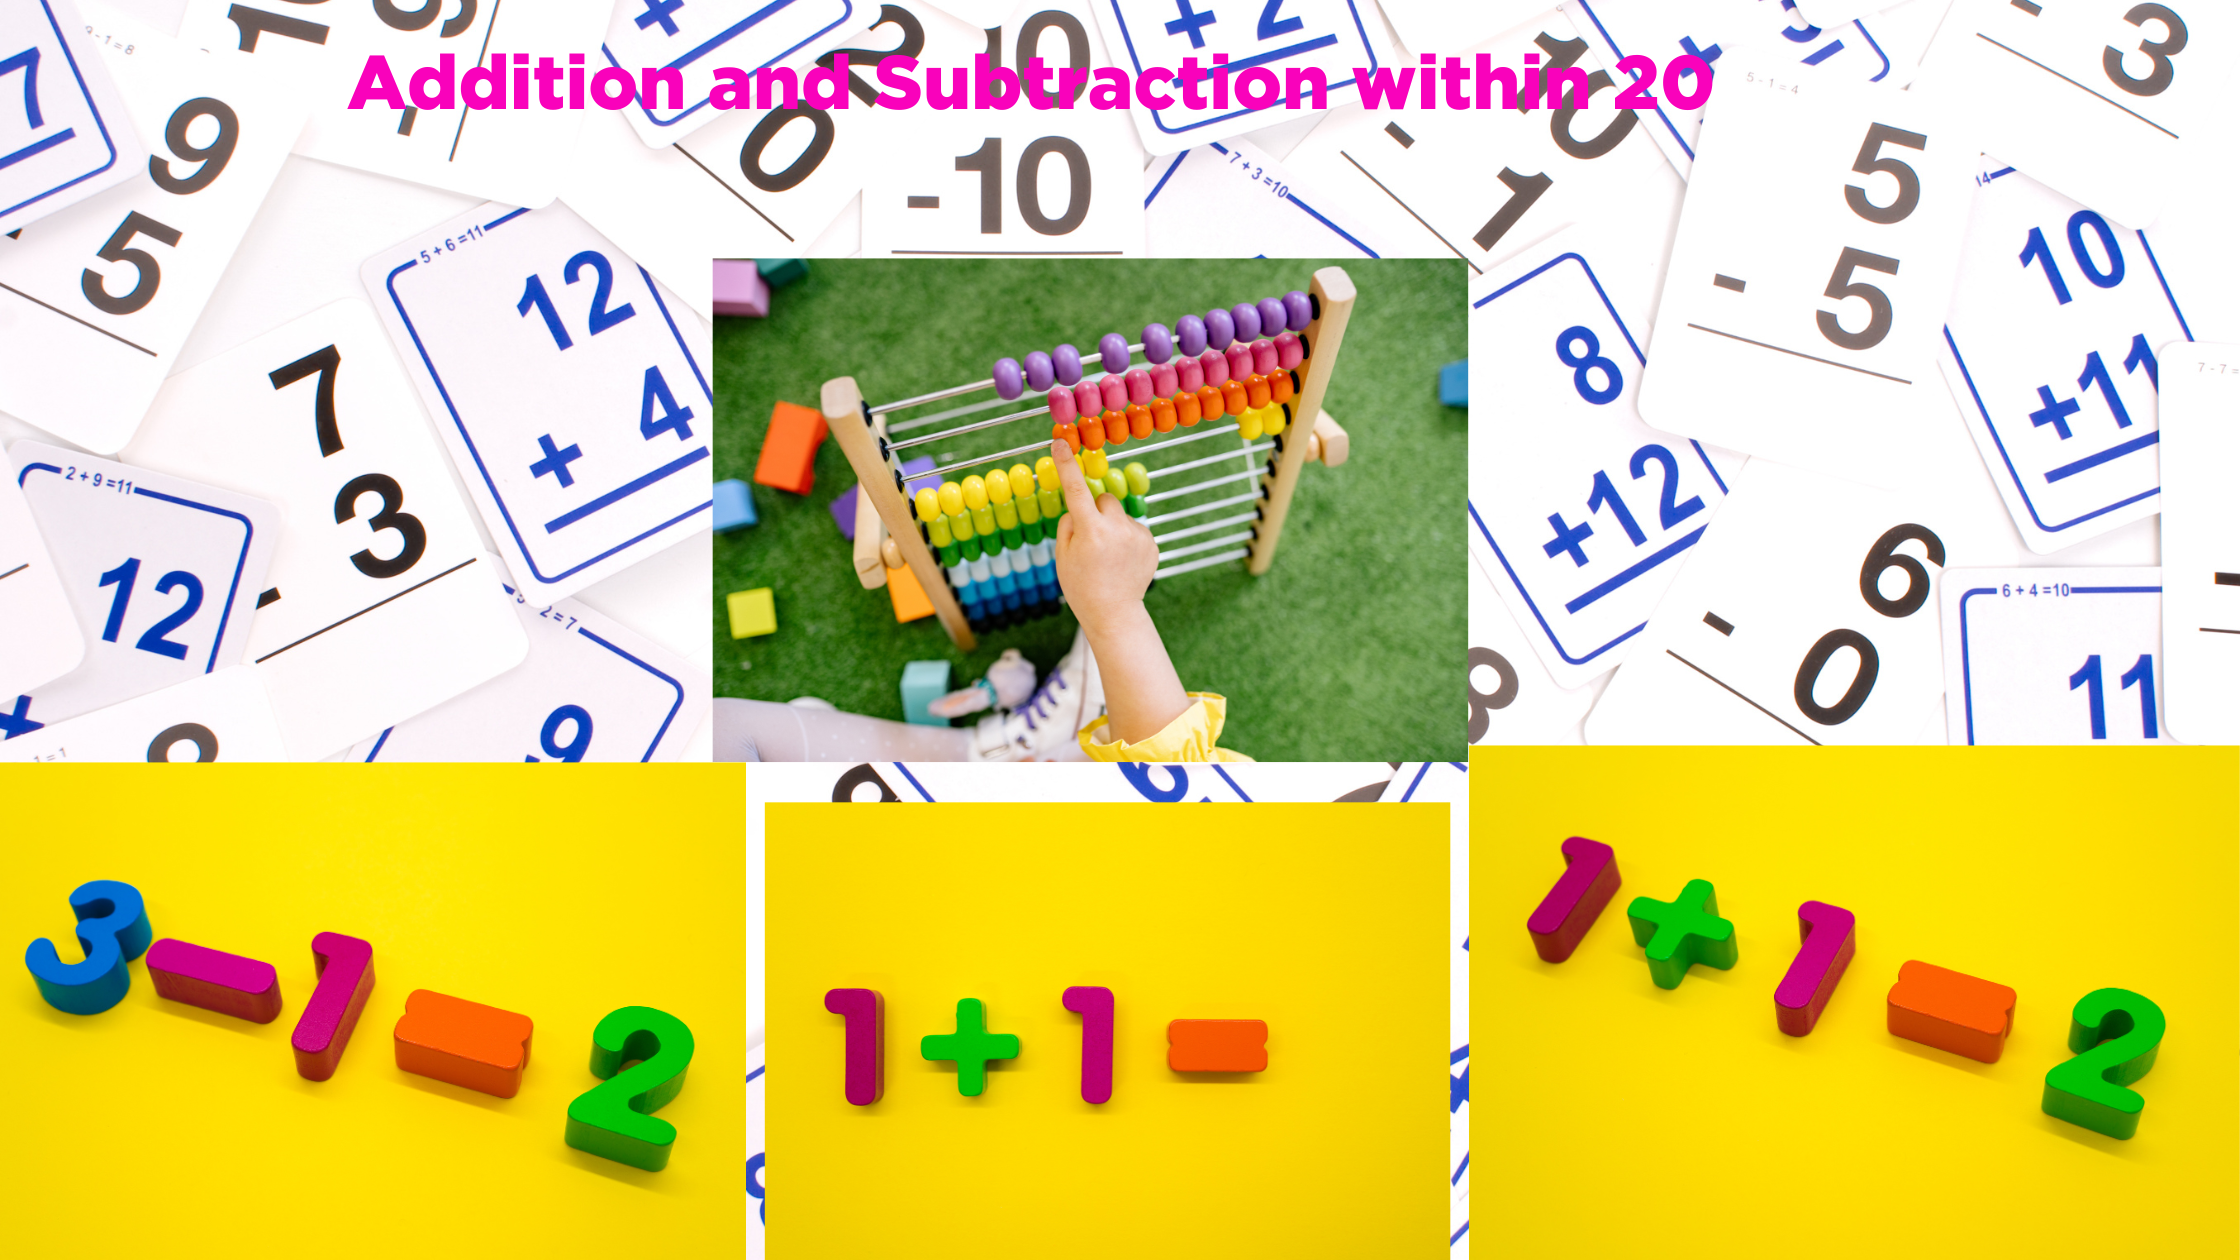 Addition and Subtraction within 20